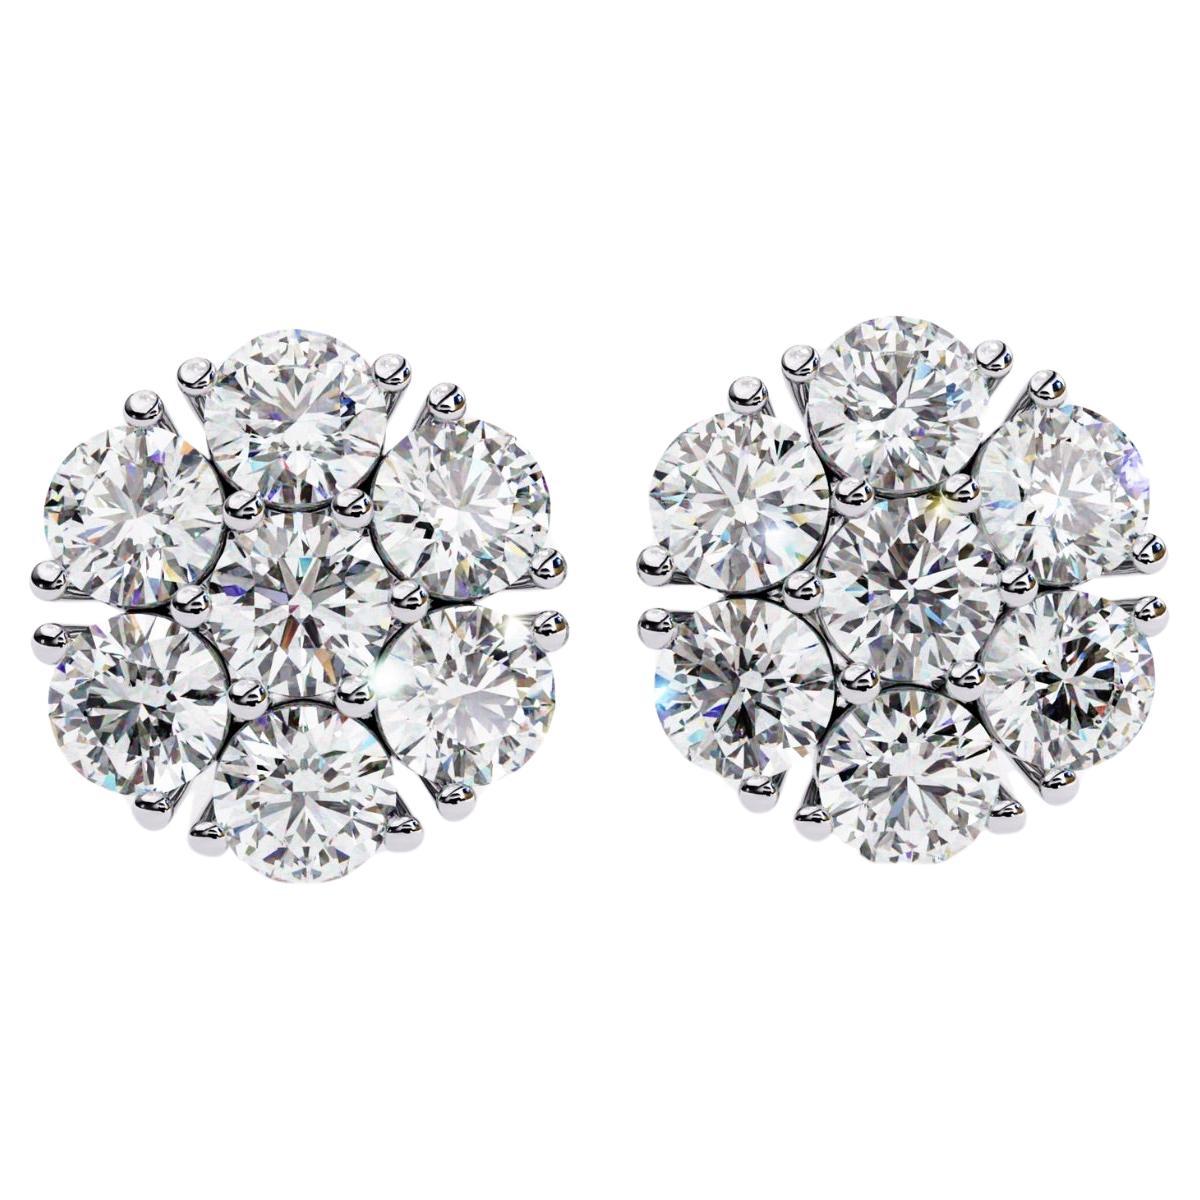 3 Ctw Diamond Studs, Cluster Earrings, 14K Solid White Gold, Round Diamonds